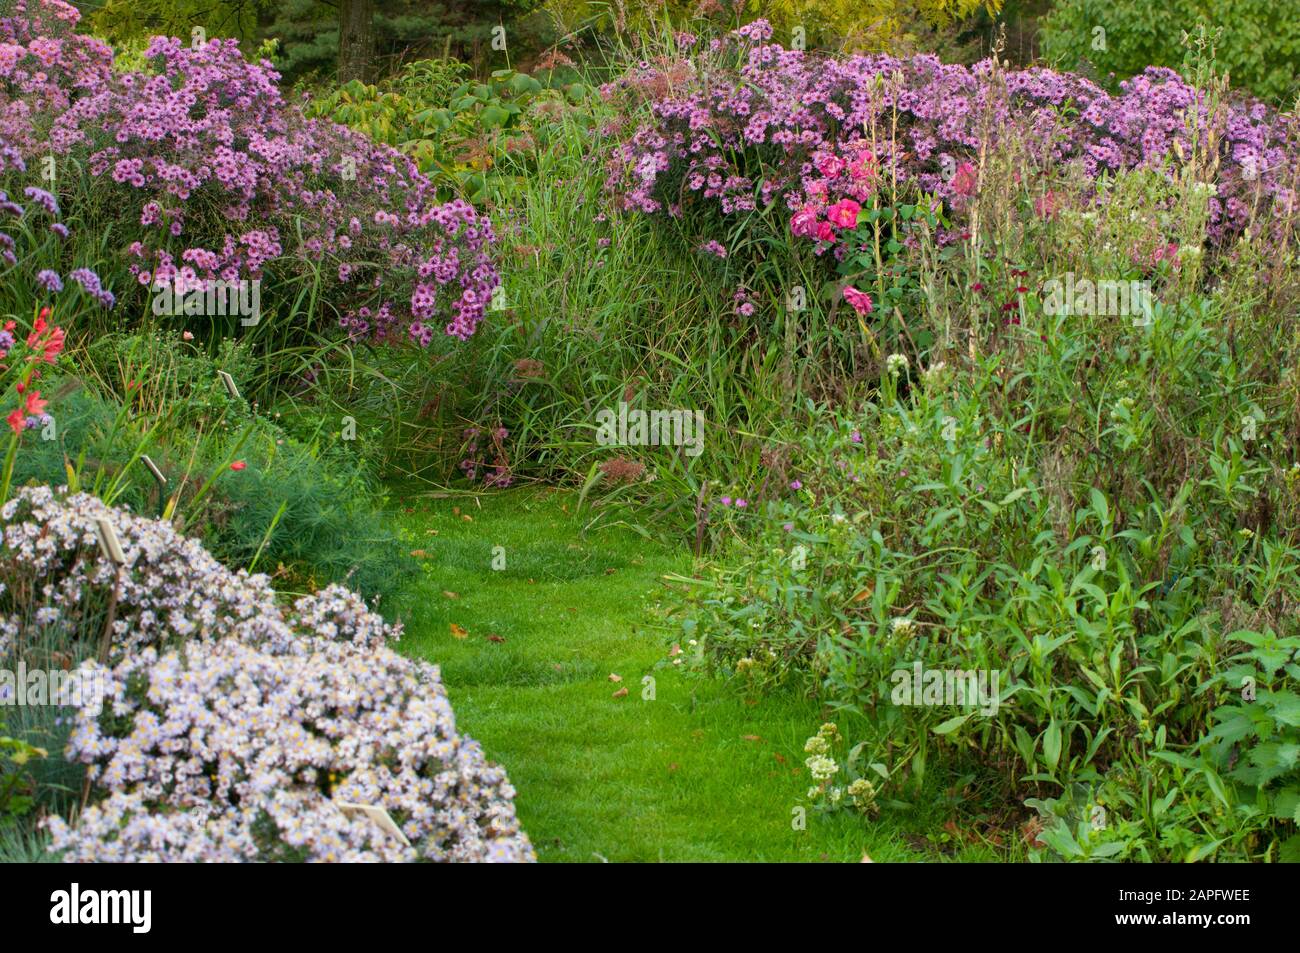 Flowered alley with Aster and Grass Stock Photo